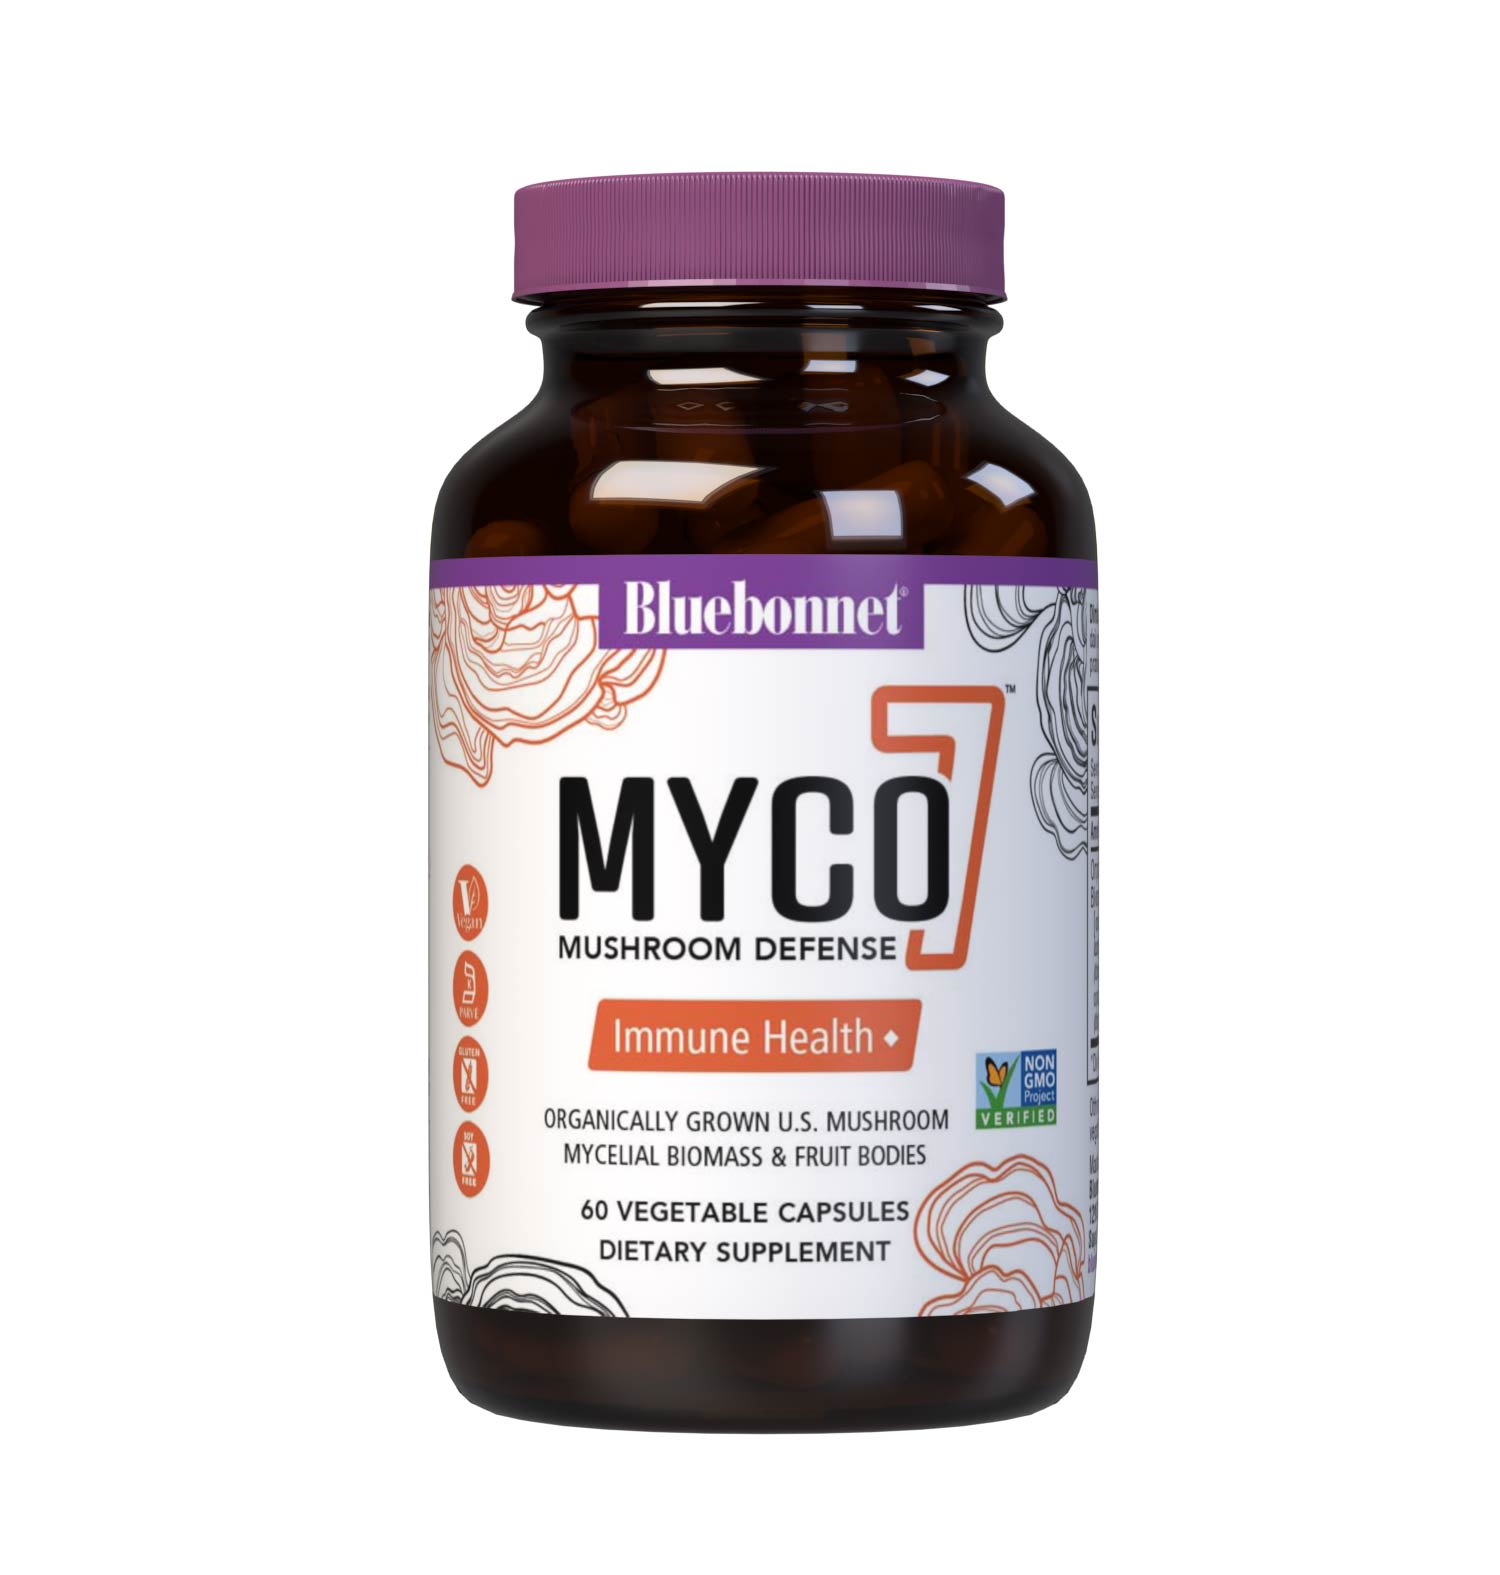 Bluebonnet’s Myco-7 Mushroom Defense Vegetable Capsules are formulated with seven organically grown, whole, full-cycle, mushrooms that are cultivated using solid state fermentation that deliver both the mycelial biomass and fruit bodies to help support immune health, energy & vitality, and daily wellness. #size_60 count